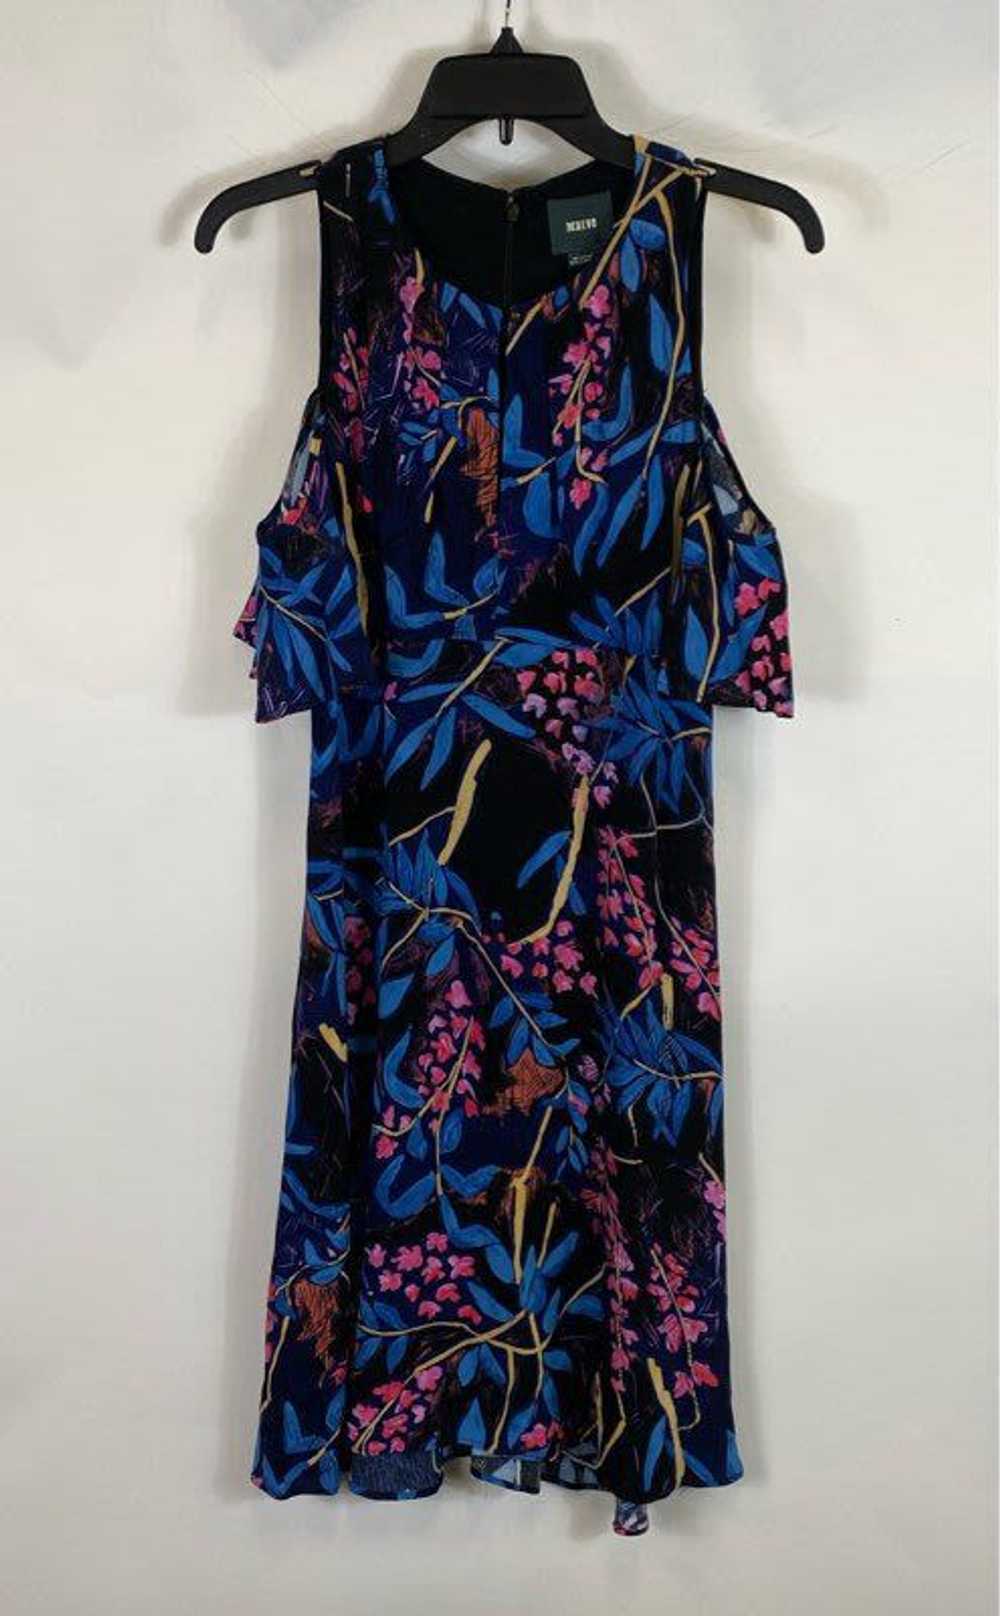 Anthropologie X Maeve Floral Maxi Dress - Size 0 - image 1